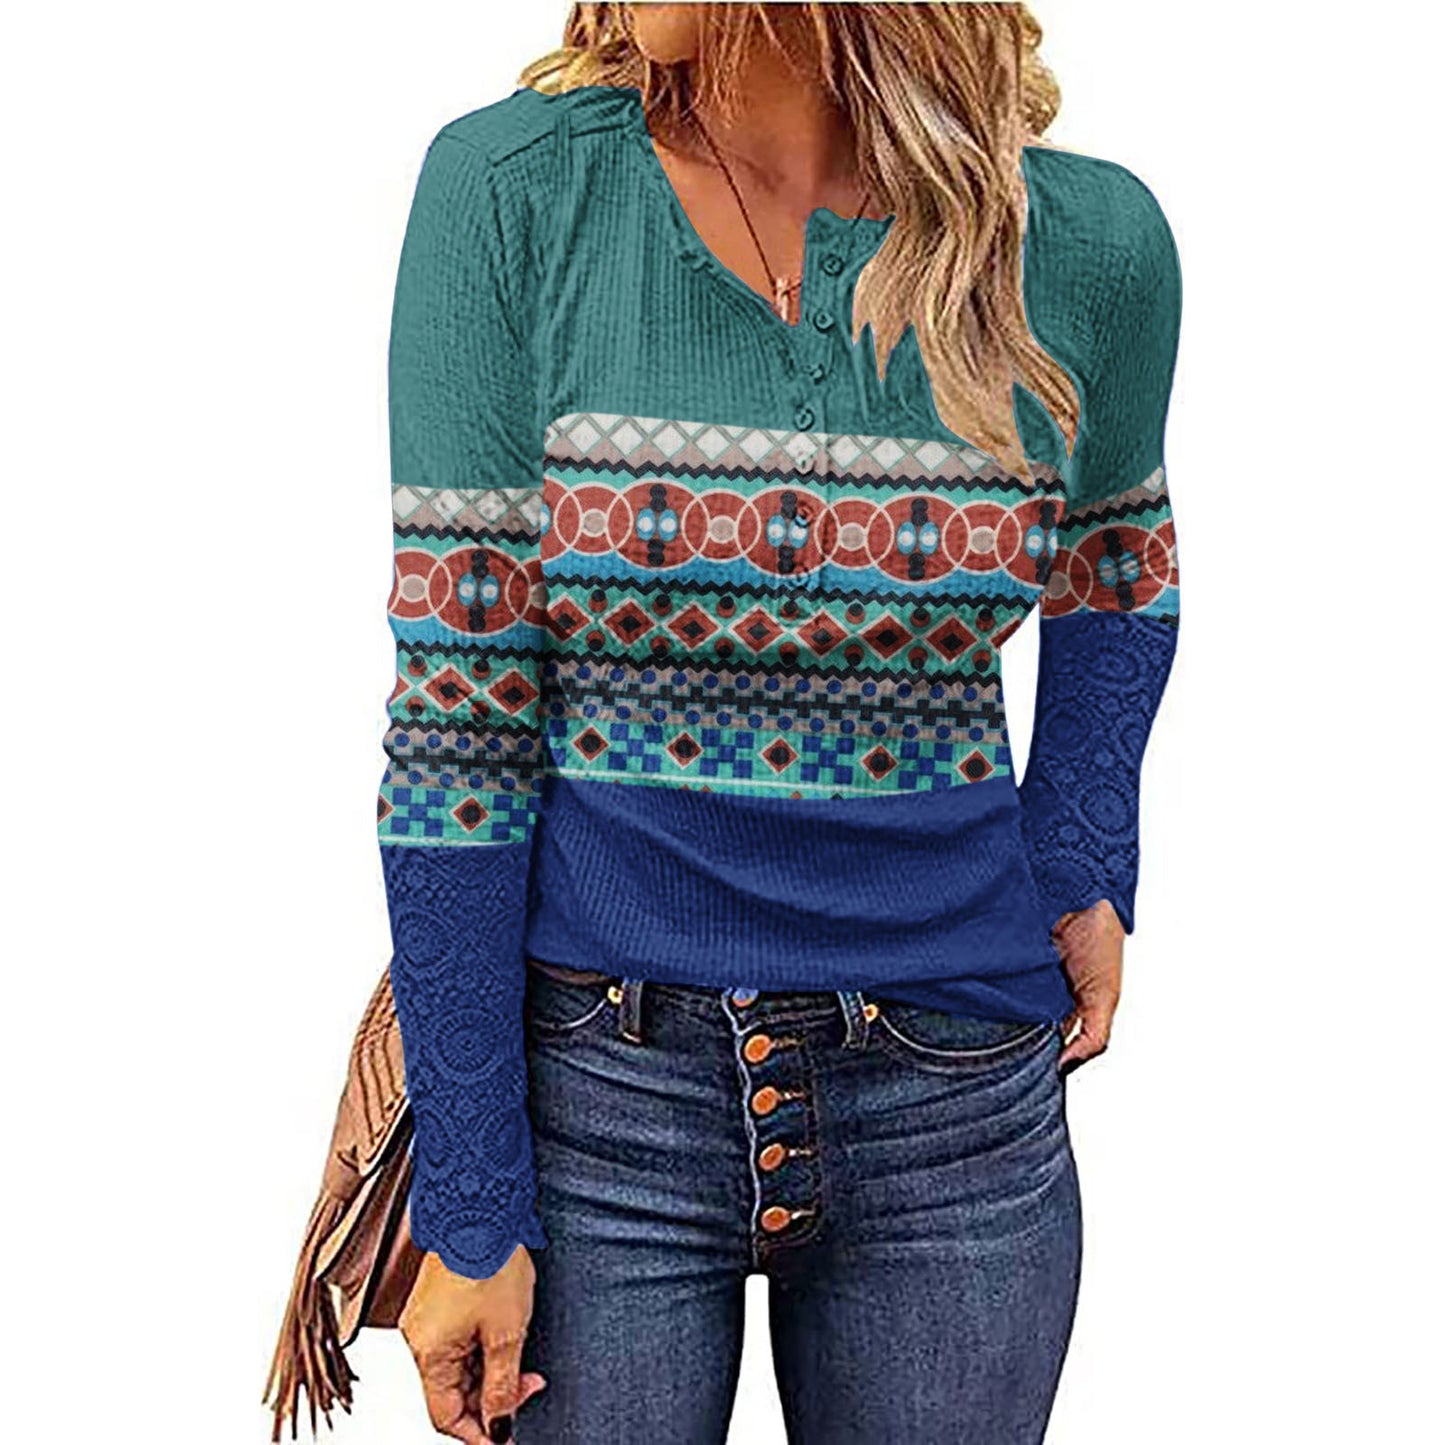 Crochet Lace Sleeve Thermal